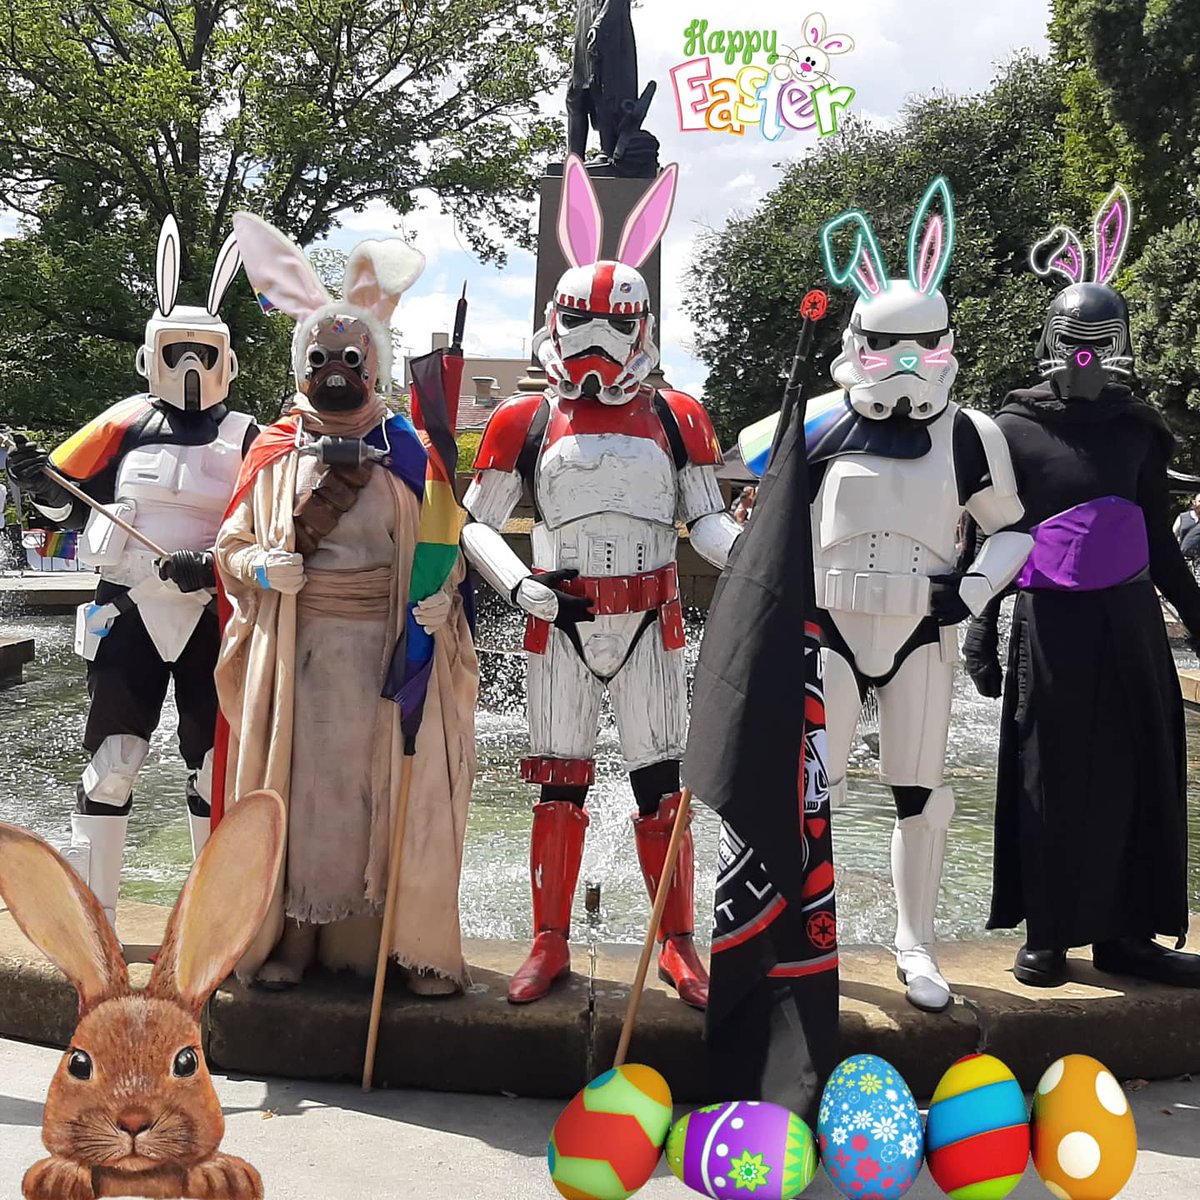 Wishing all our loyal Imperial Citizens in Tasmania and the Galaxy a Happy and safe Easter.
#StarWars #stormtrooper #shocktrooper #scouttrooper #sstd #BadGuysDoingGood #501st #tasmania #community #tuskenraider #kraytclandetachment #pathfinders #fisd #kyloren #hobart #easter